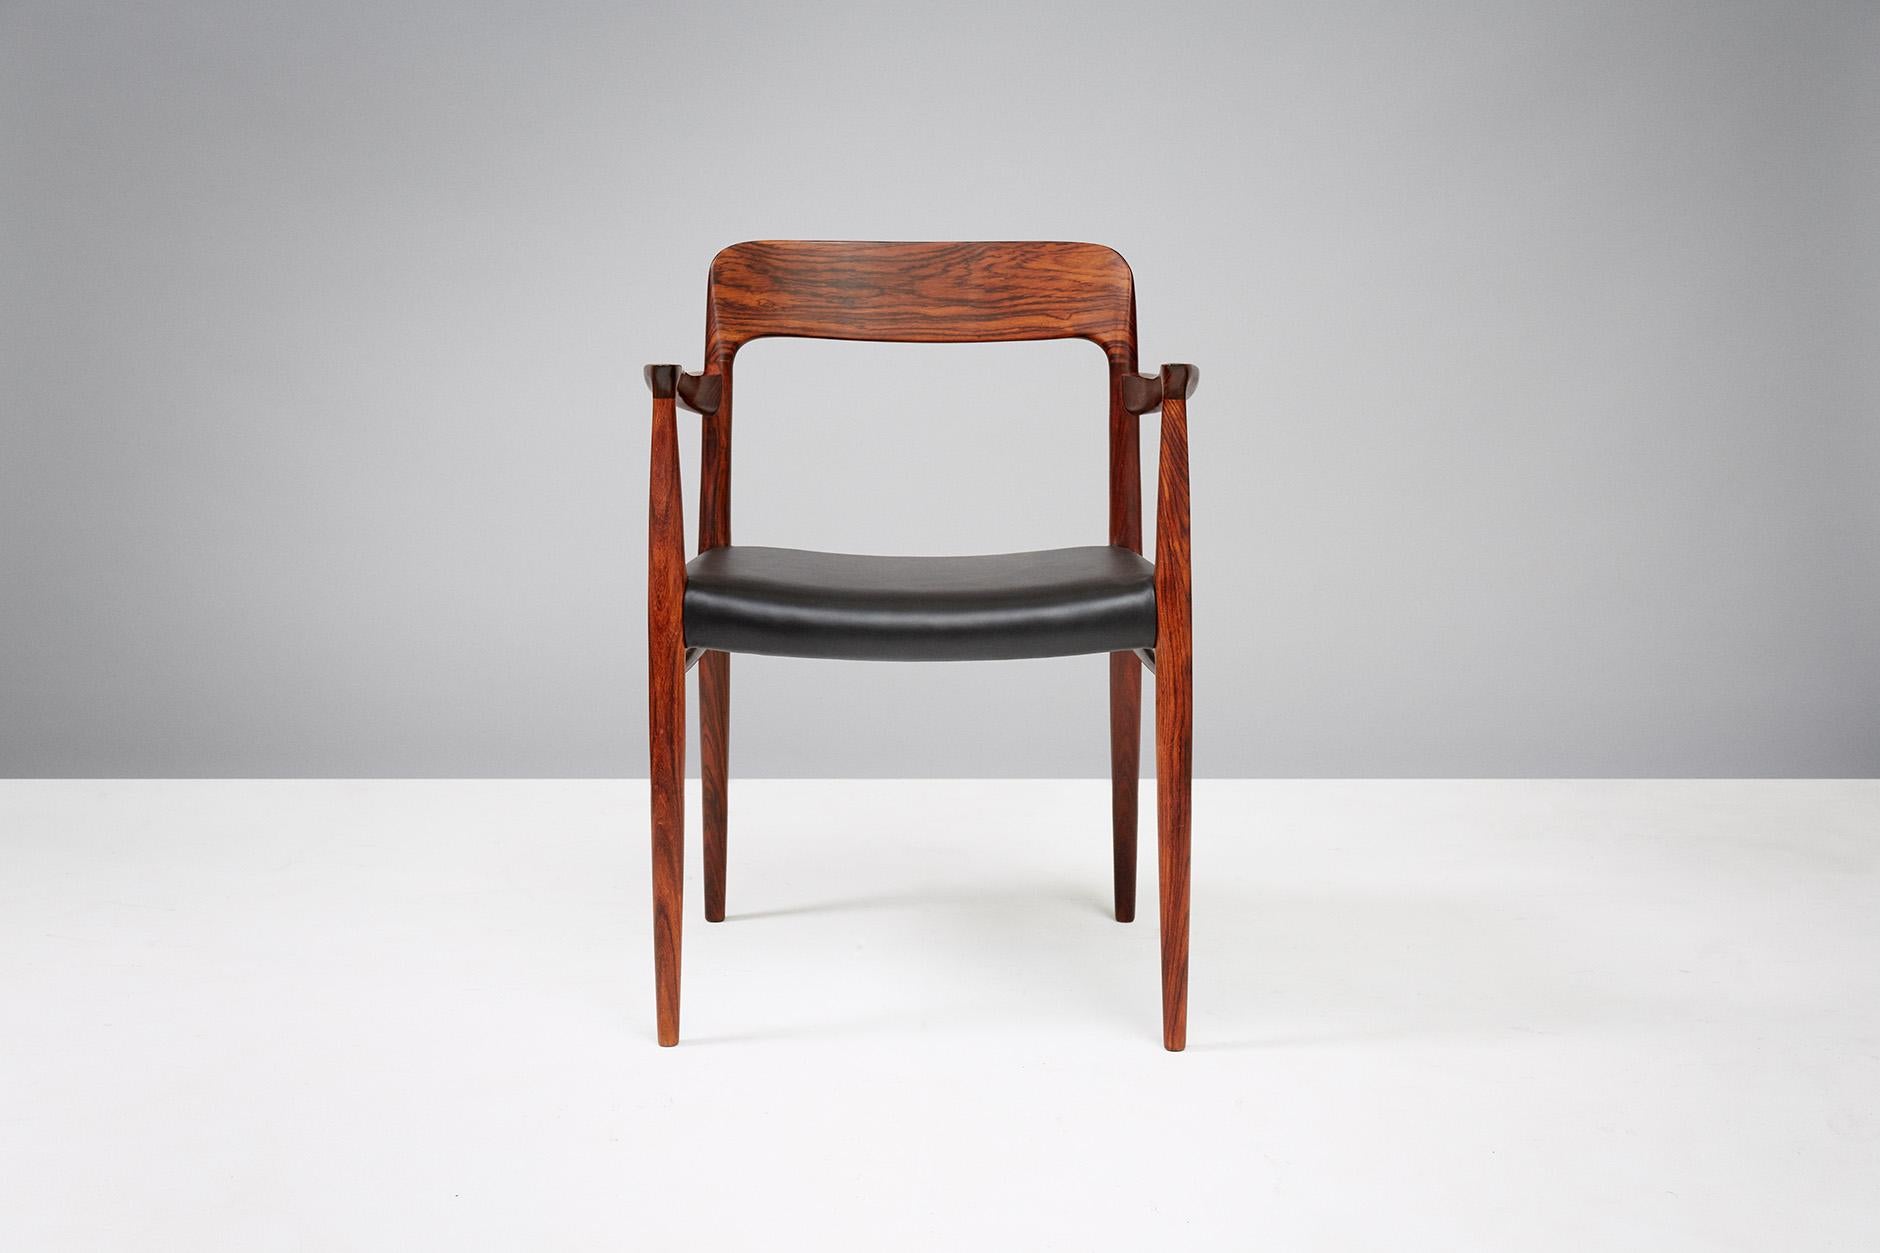 Niels Moller

Model 56 armchair, 1954

The model 56 was one of Niels Moller's earliest designs and remains one of his most popular. This rare example comes in highly figured rosewood and was produced JL Moller Mobelfabrik, Denmark, 1954.
 